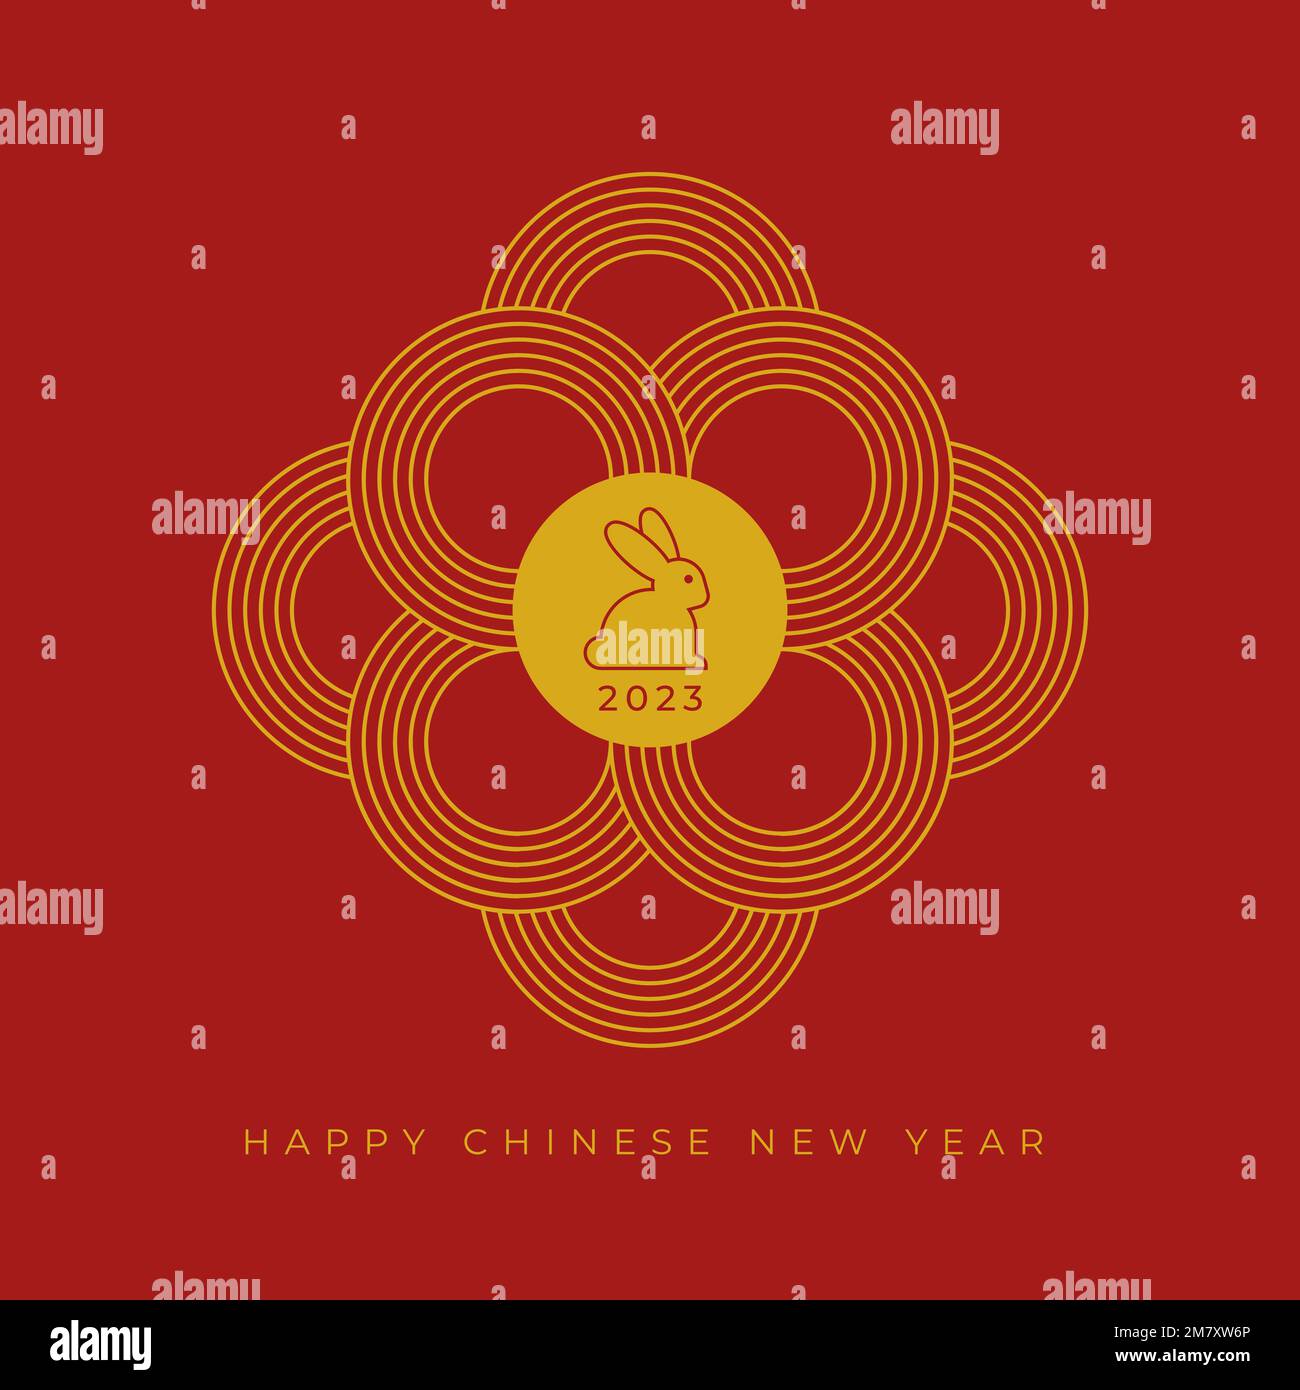 Happy Chinese New Year. Year of the rabbit. 2023. Vector illustration, flat design Stock Vector